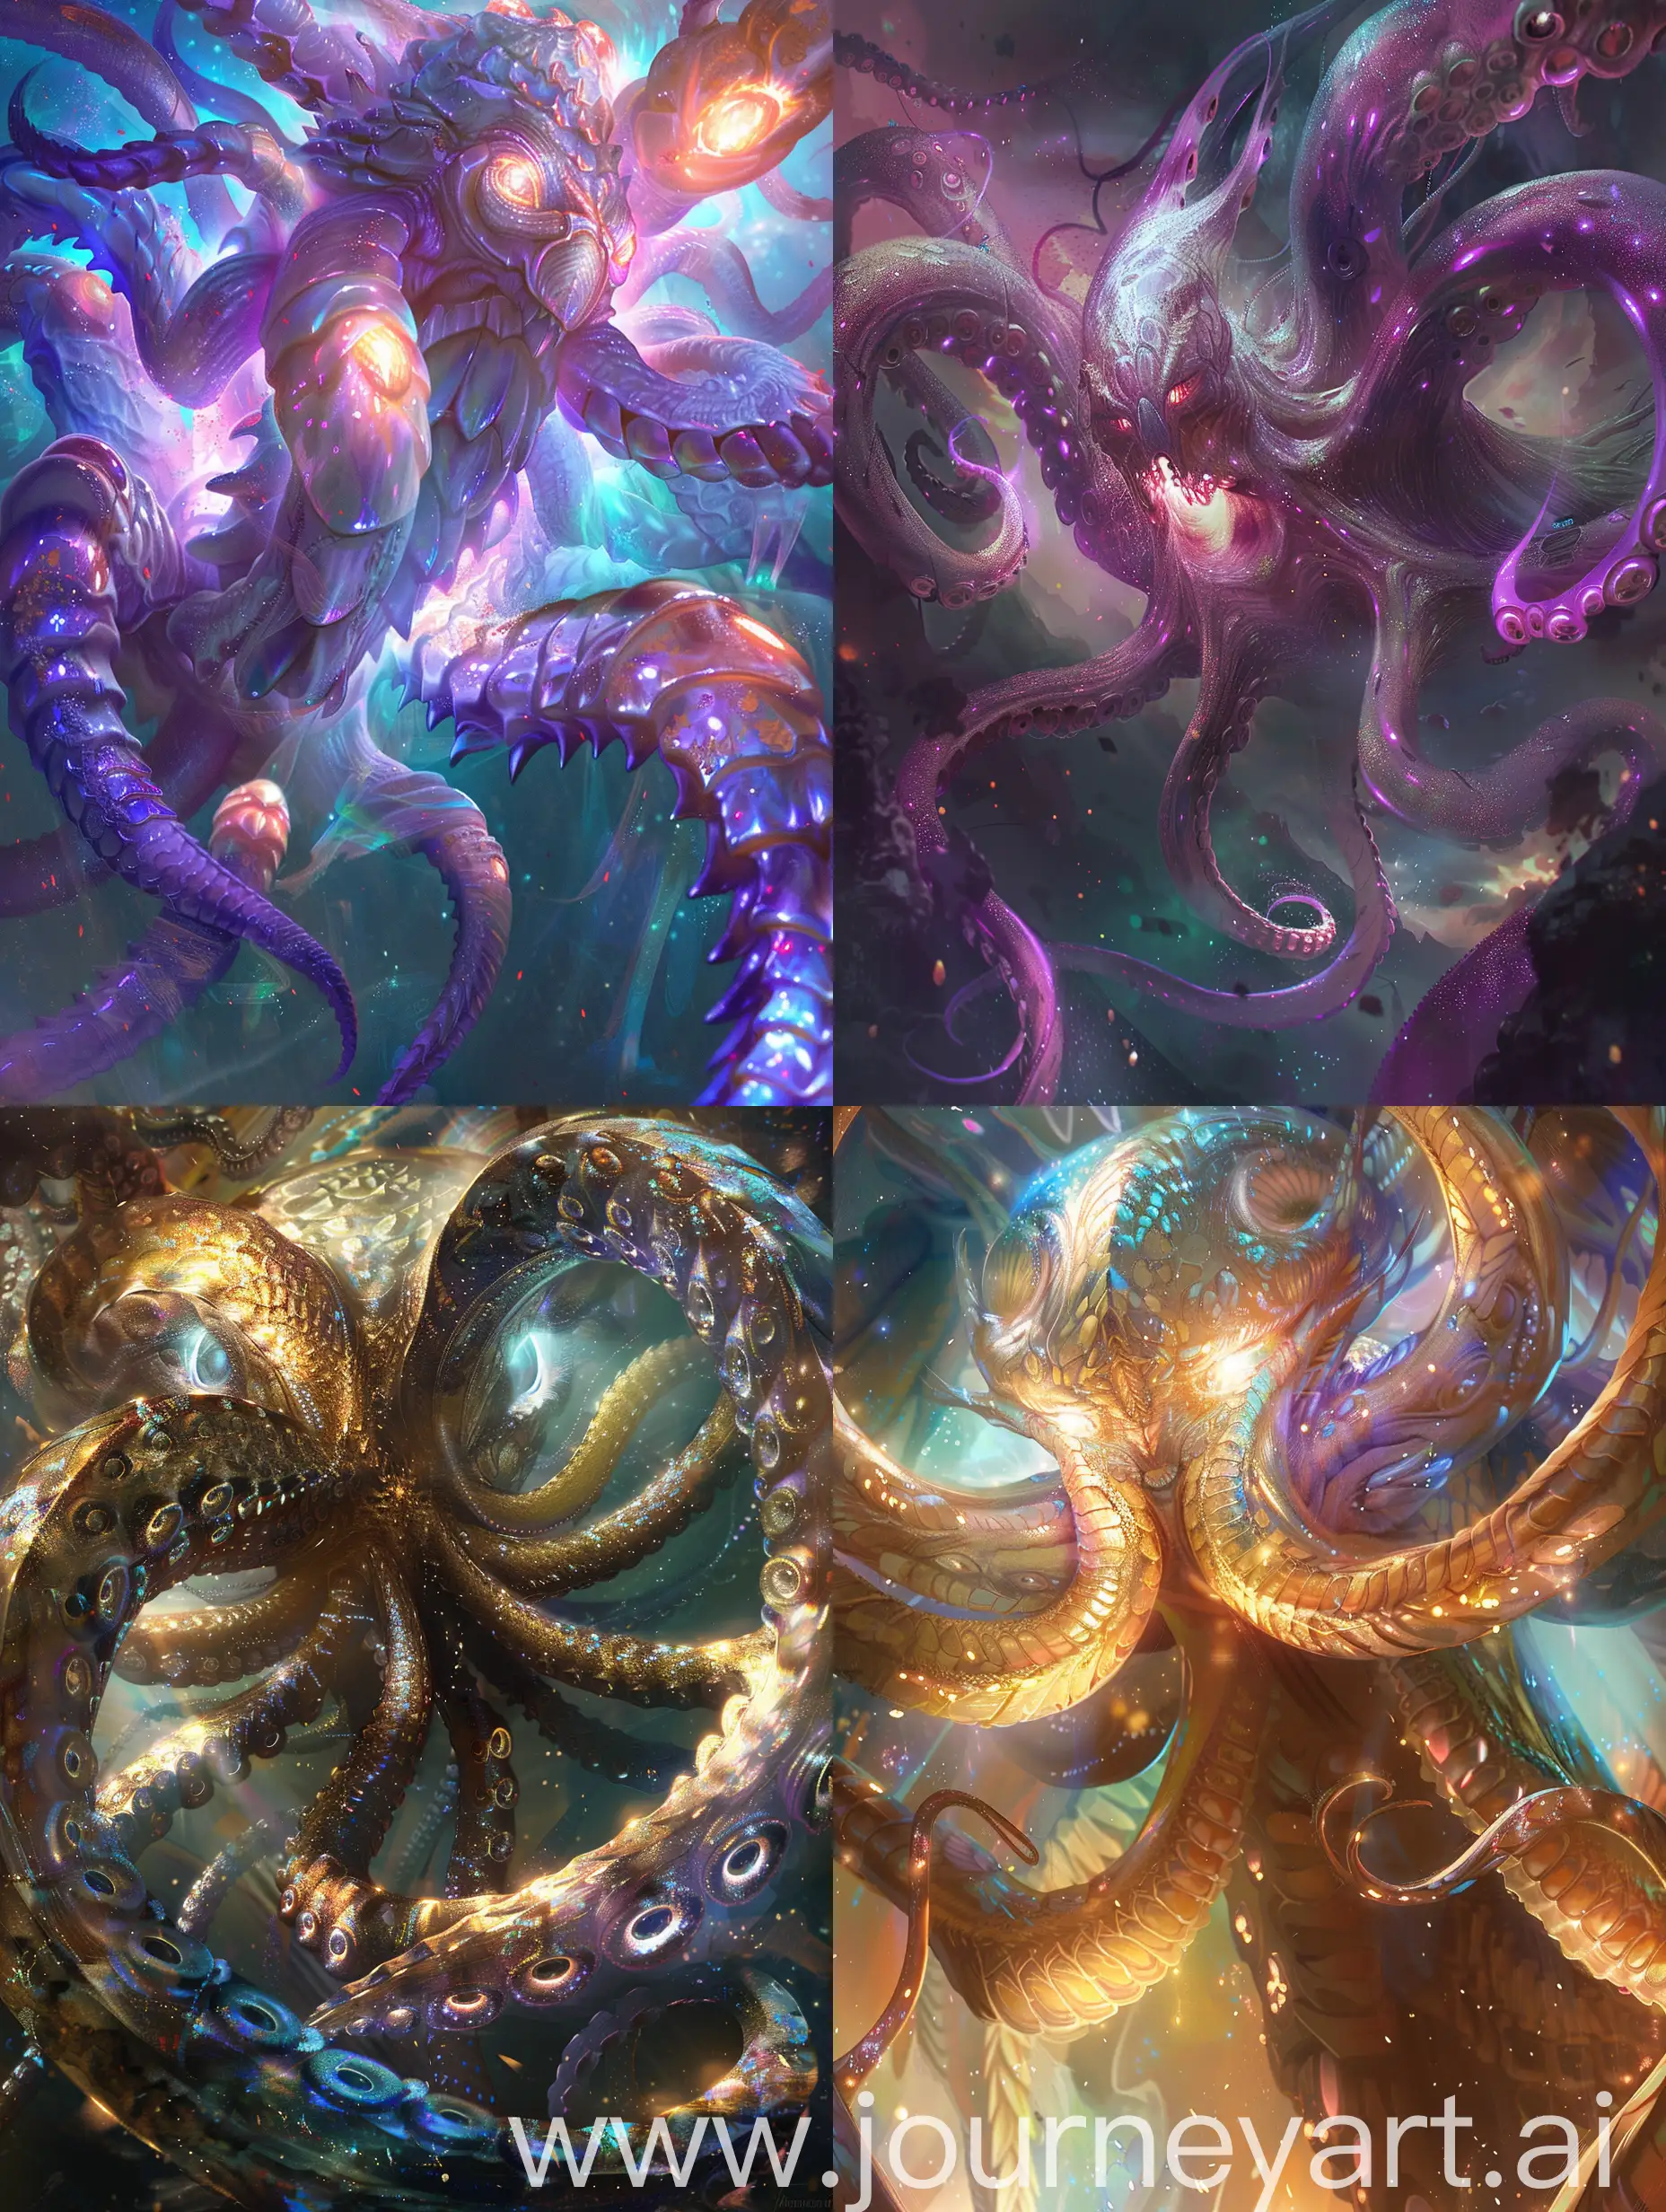 A luminous, pulsating titan with swirling tentacles and iridescent scales, the focal point of this concept art is a massive, otherworldly creature. The image is a digital painting, showcasing intricate details and vibrant colors. The titan's eyes shimmer with ethereal light, while its tentacles writhe with hypnotic grace. Each scale reflects the light in a mesmerizing display, creating an atmosphere of awe and wonder. This high-quality image transports viewers to a fantastical realm filled with mystery and intrigue.